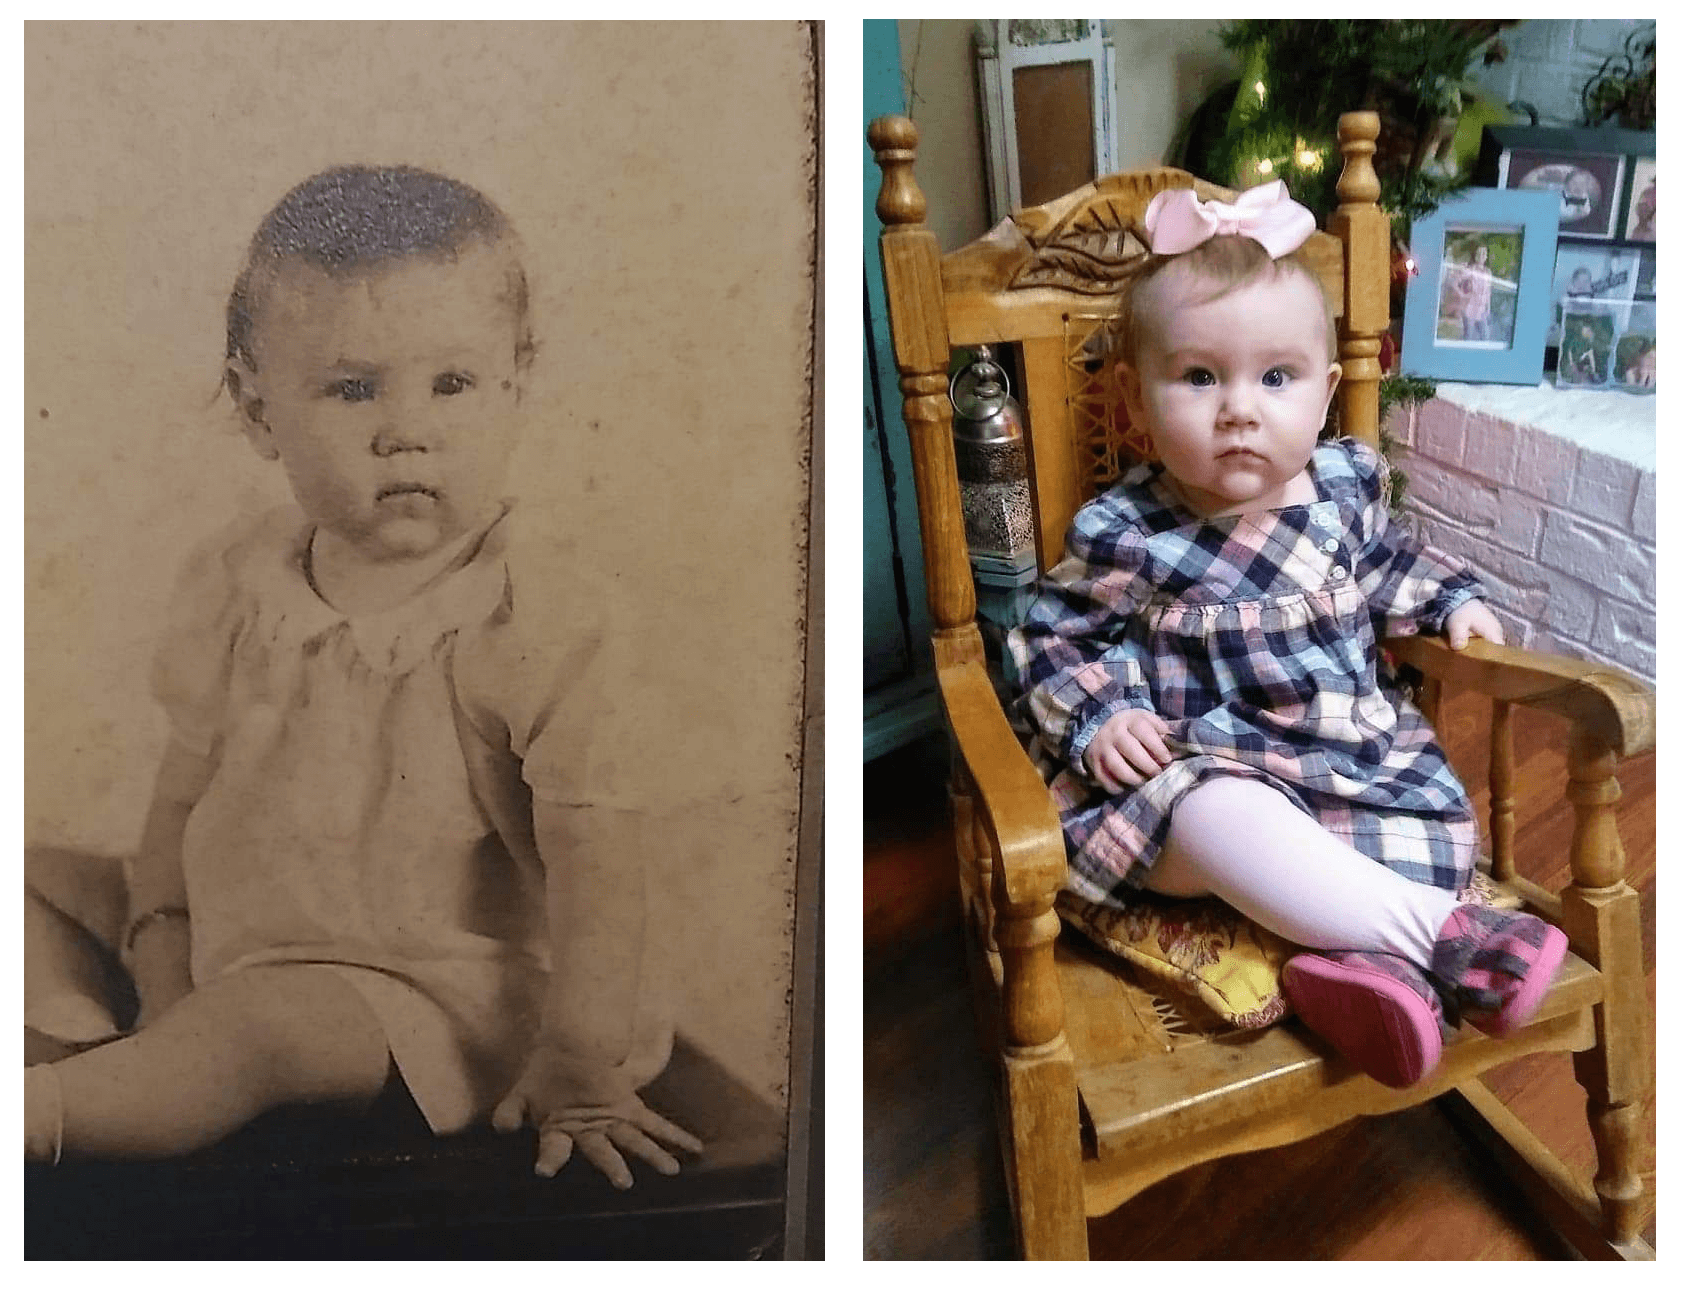 From left, Megan’s great-grandmother May Ballard Germer born 1934, and her second cousin Rhiannon Baker born 2018.